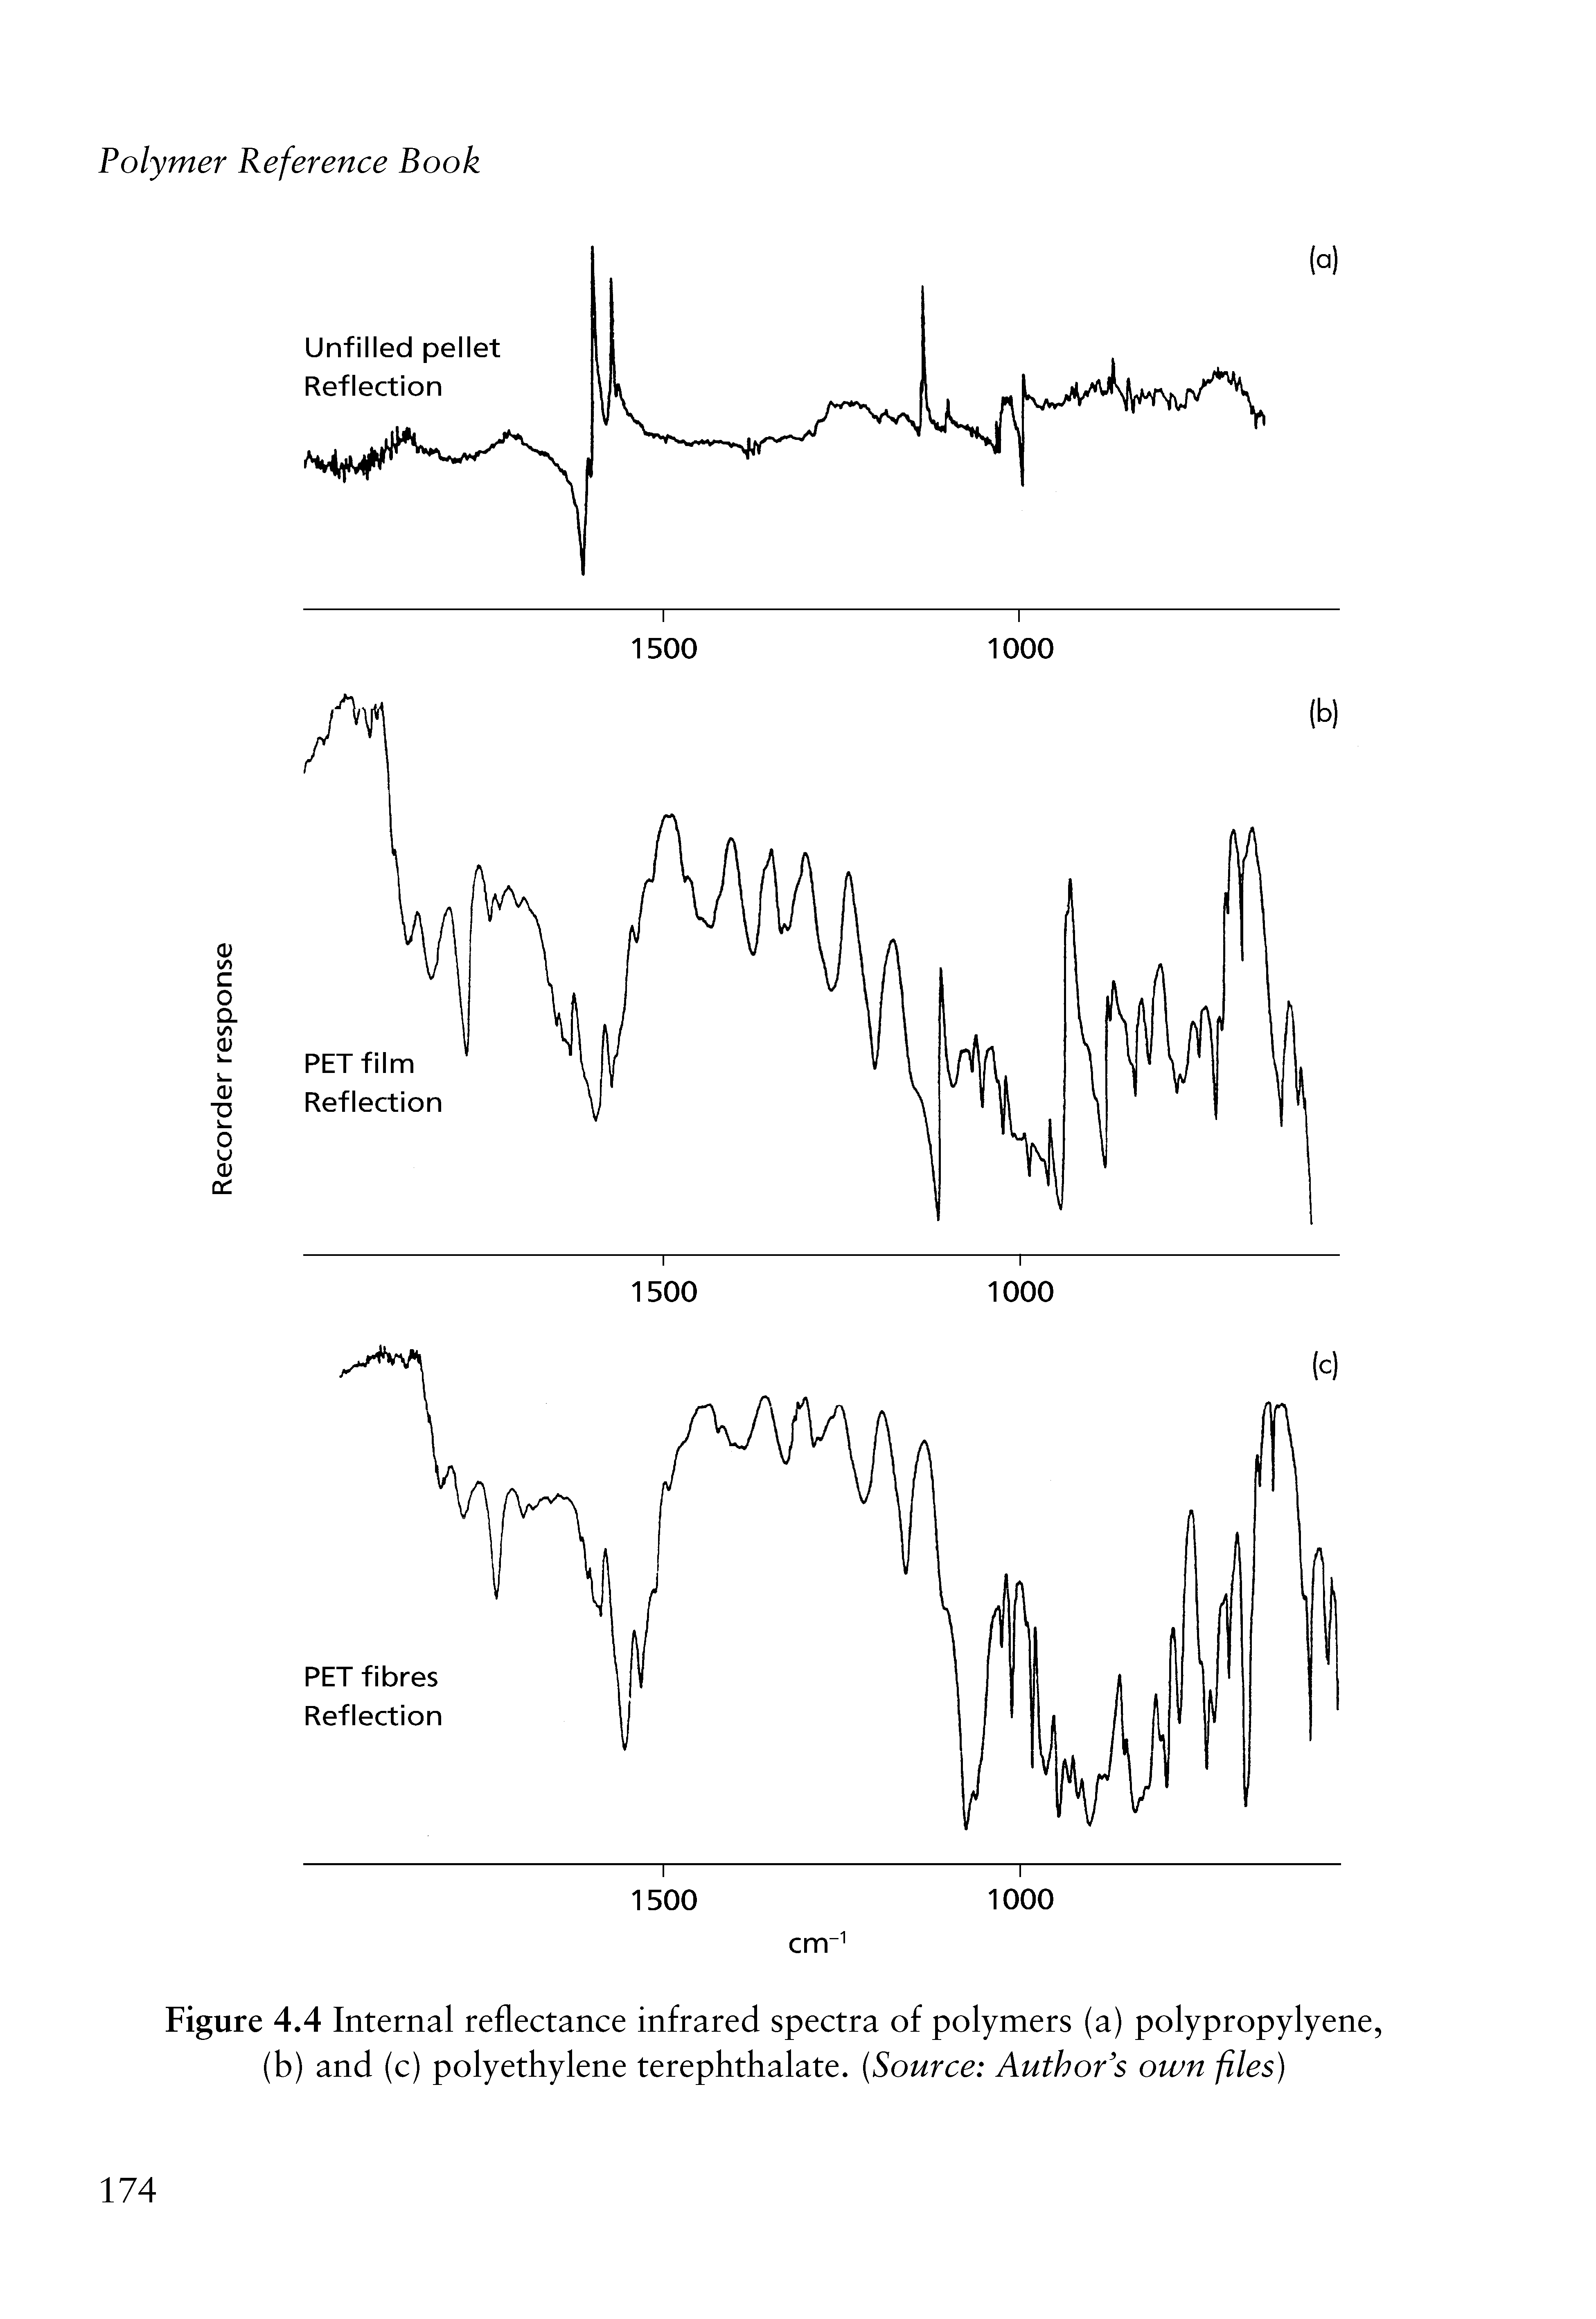 Figure 4.4 Internal reflectance infrared spectra of polymers (a) polypropylyene, (b) and (c) polyethylene terephthalate. Source Author s own files)...